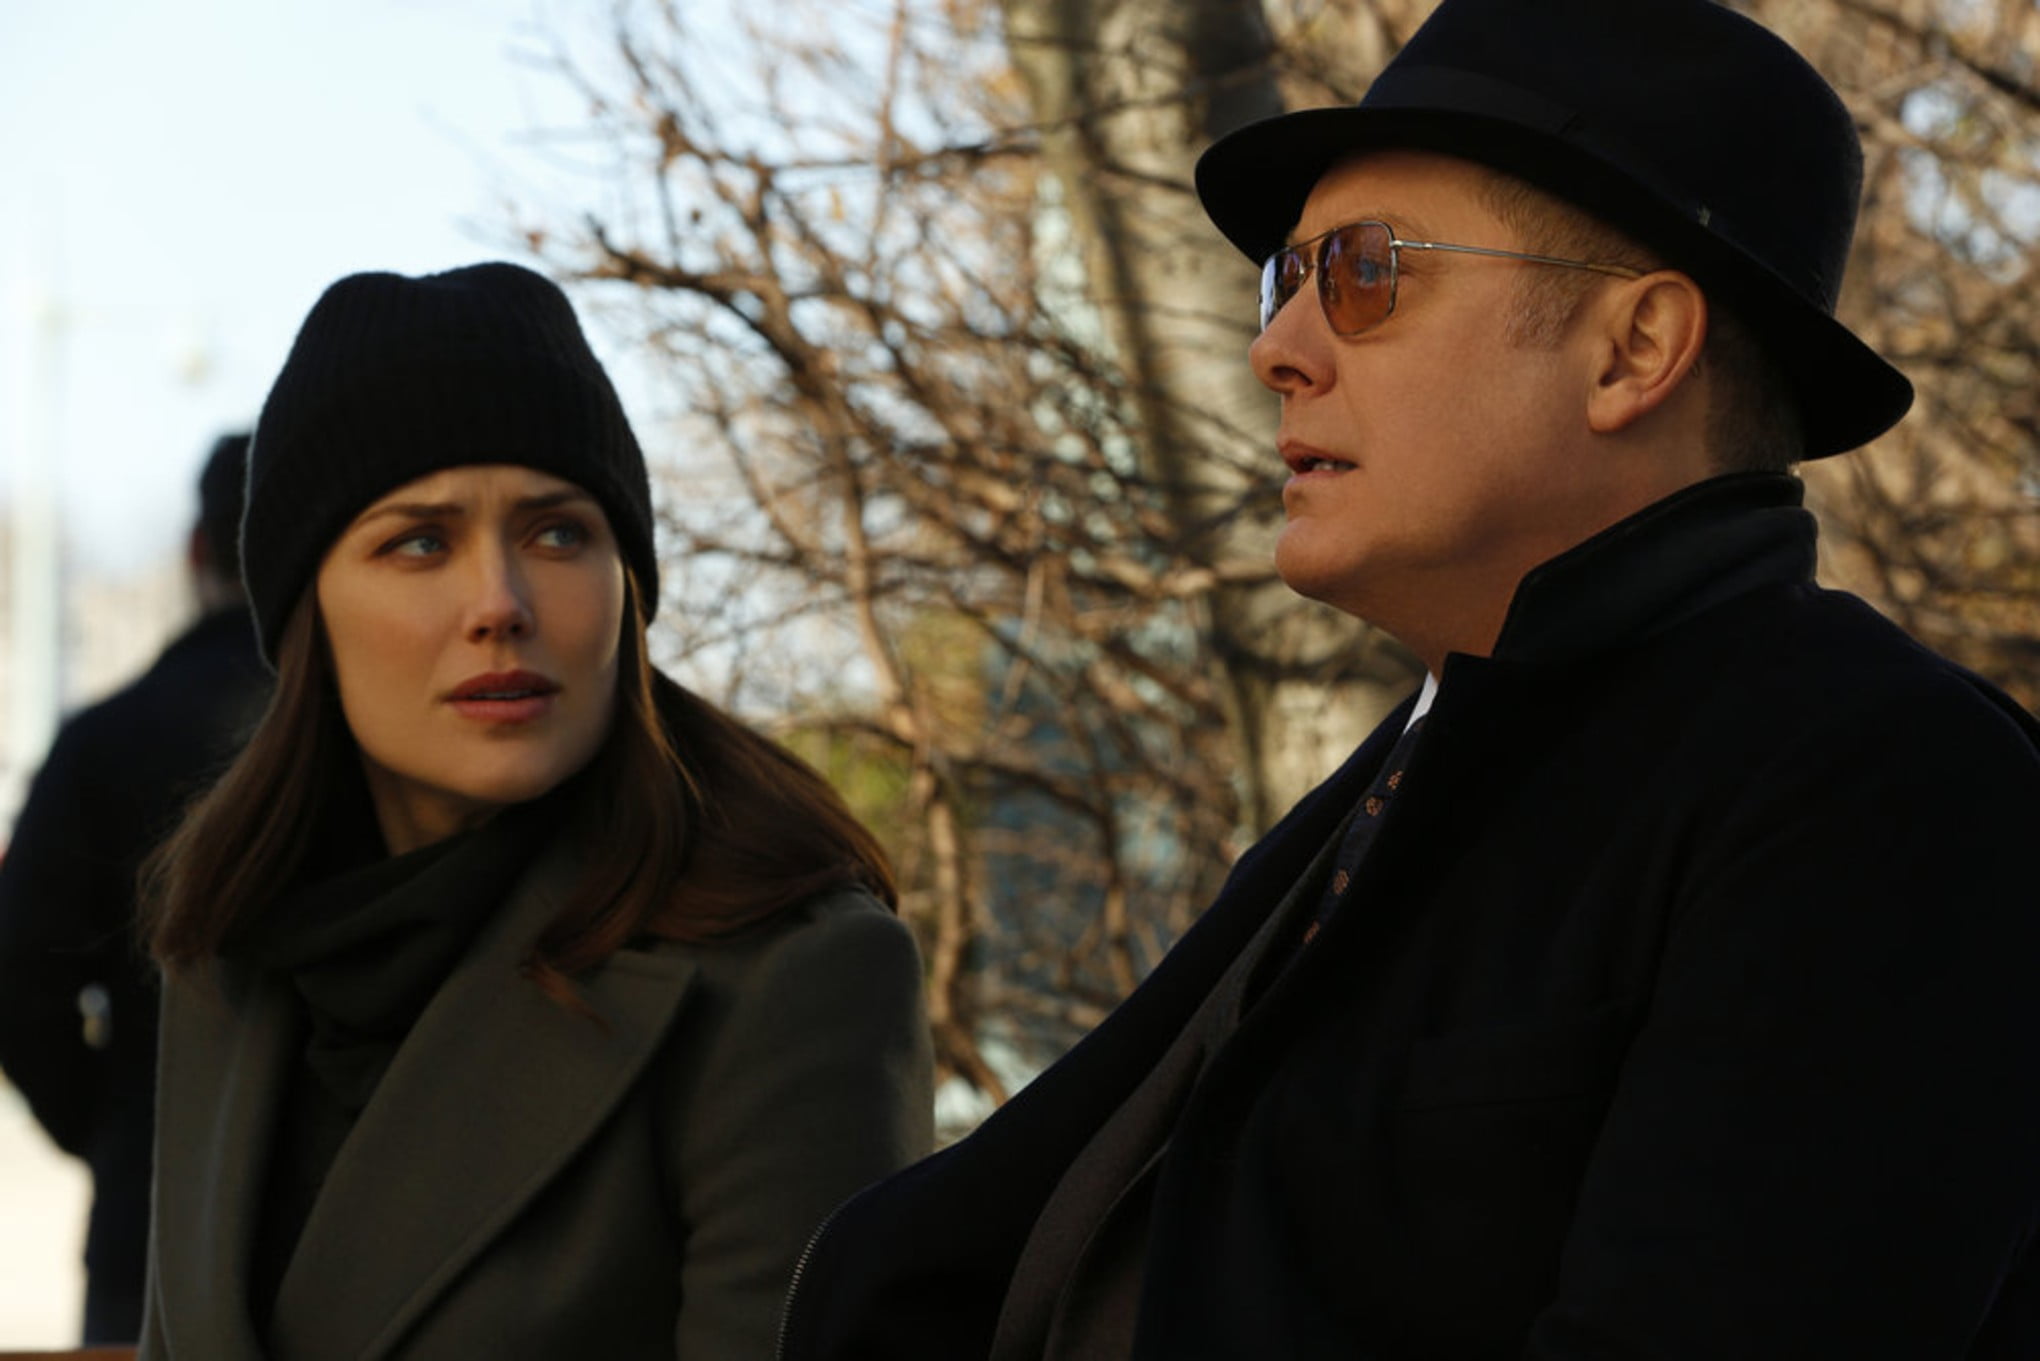 The Blacklist Season 9: Is there an NBC Air Date? - Daily Research Plot